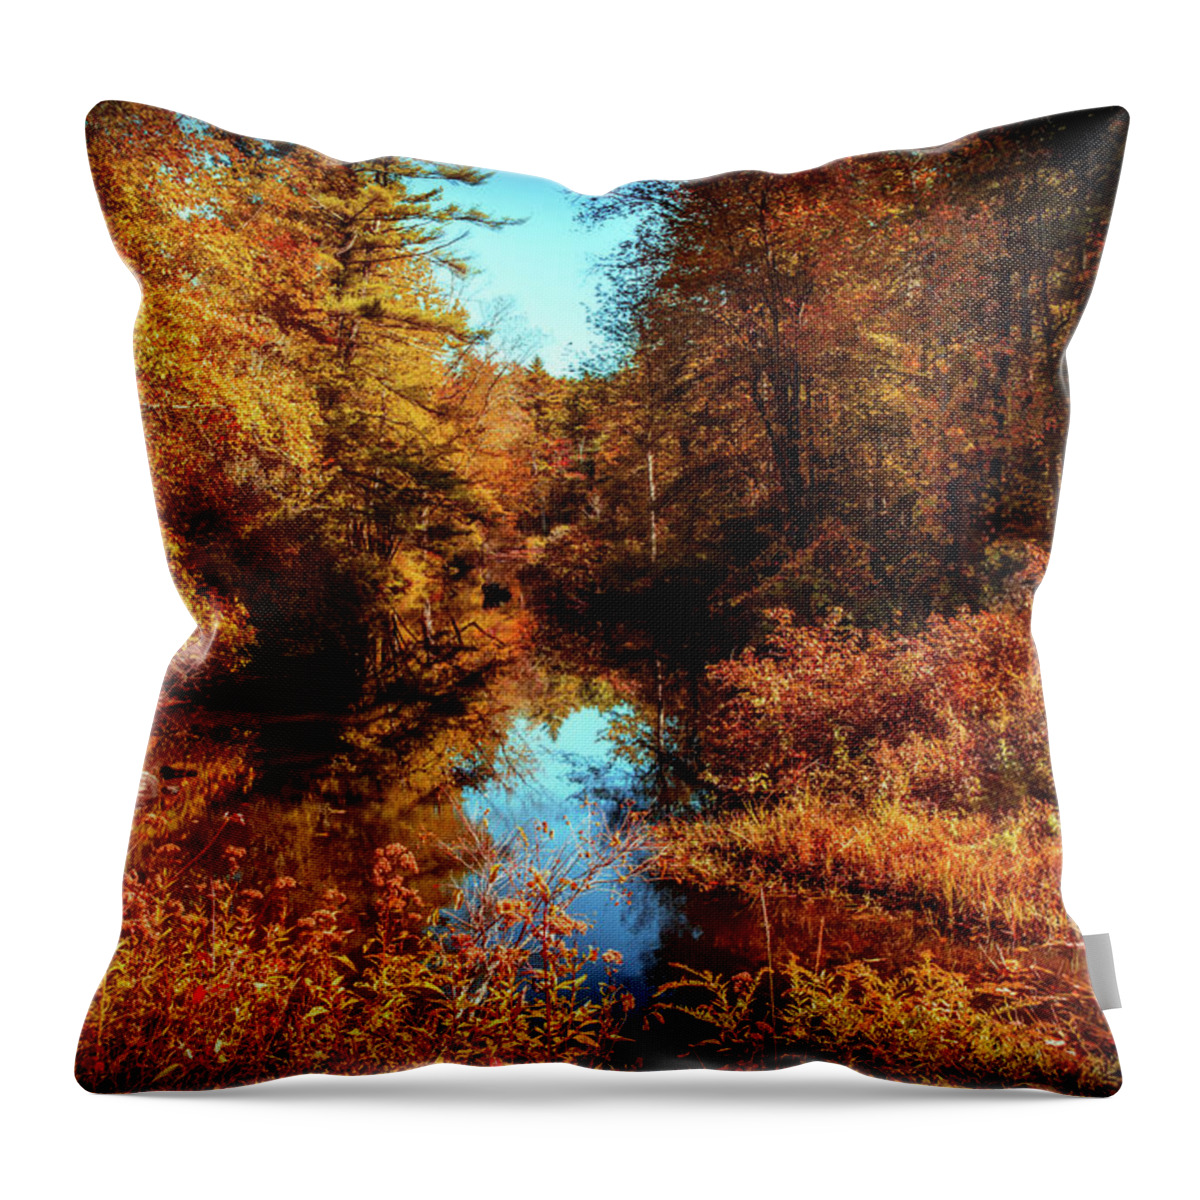 Fall Landscape Throw Pillow featuring the photograph Golden autumn a by Lilia D